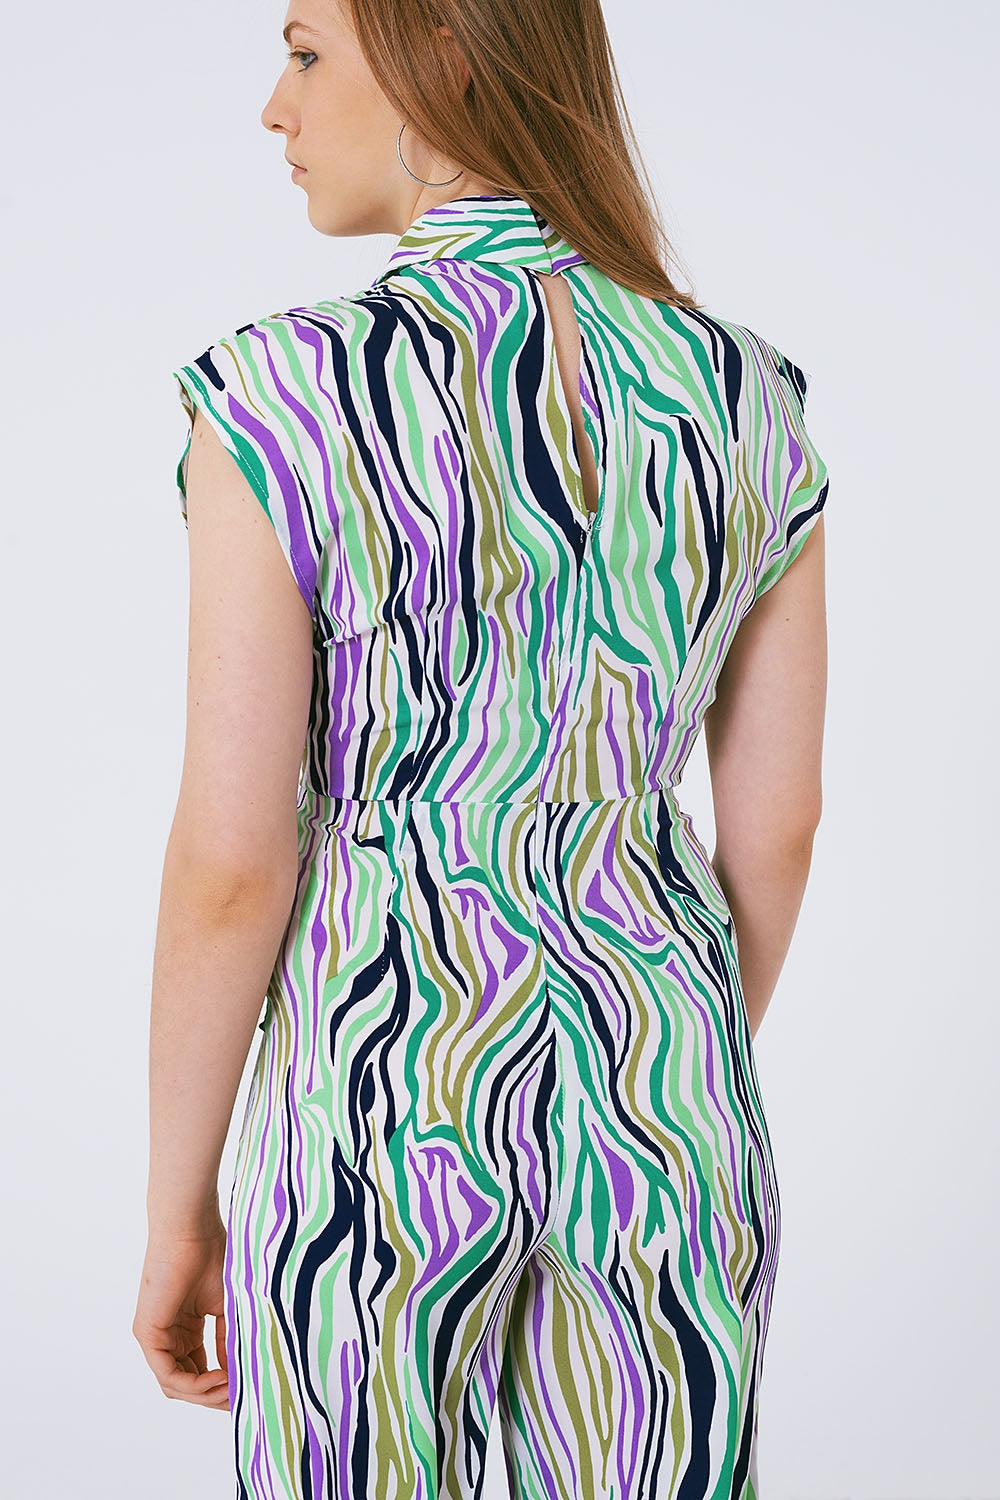 Jumpsuit With Smoking Collard in Multicolored Abstract Print - Szua Store